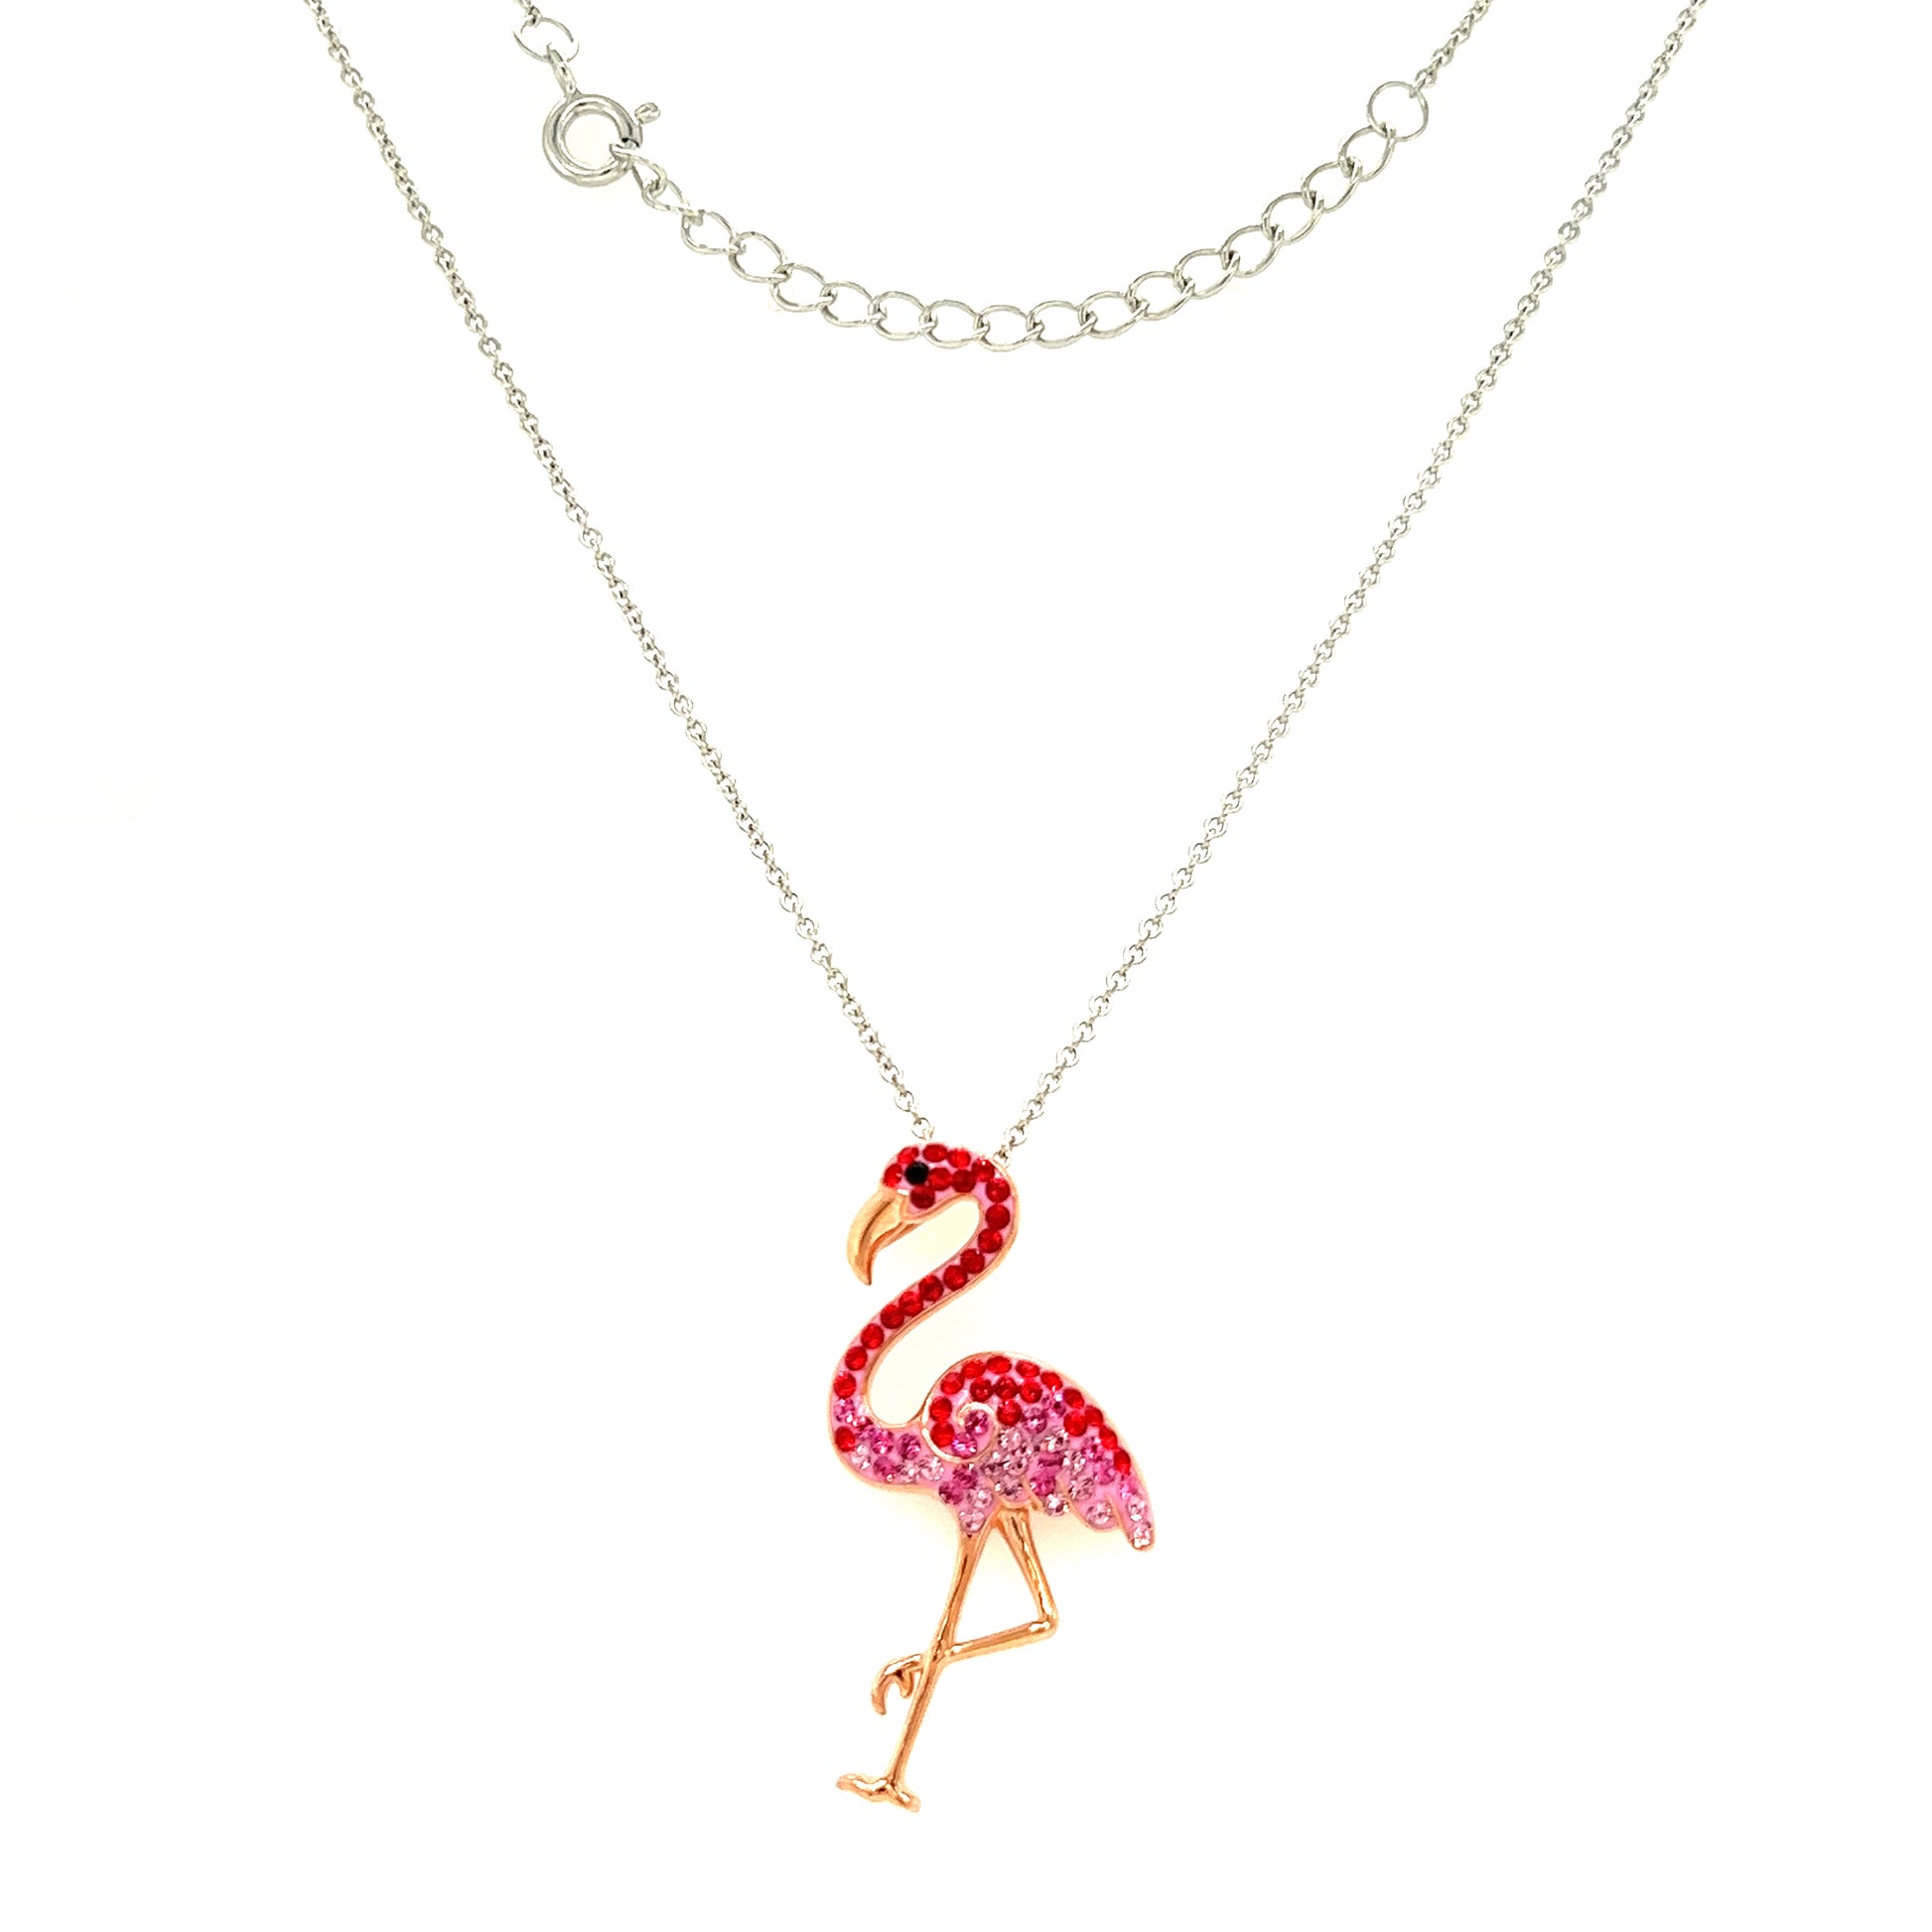 Flamingo Necklace with Red and Pink Crystals and Rose Gold Plating in Sterling Silver Full Necklace Front View